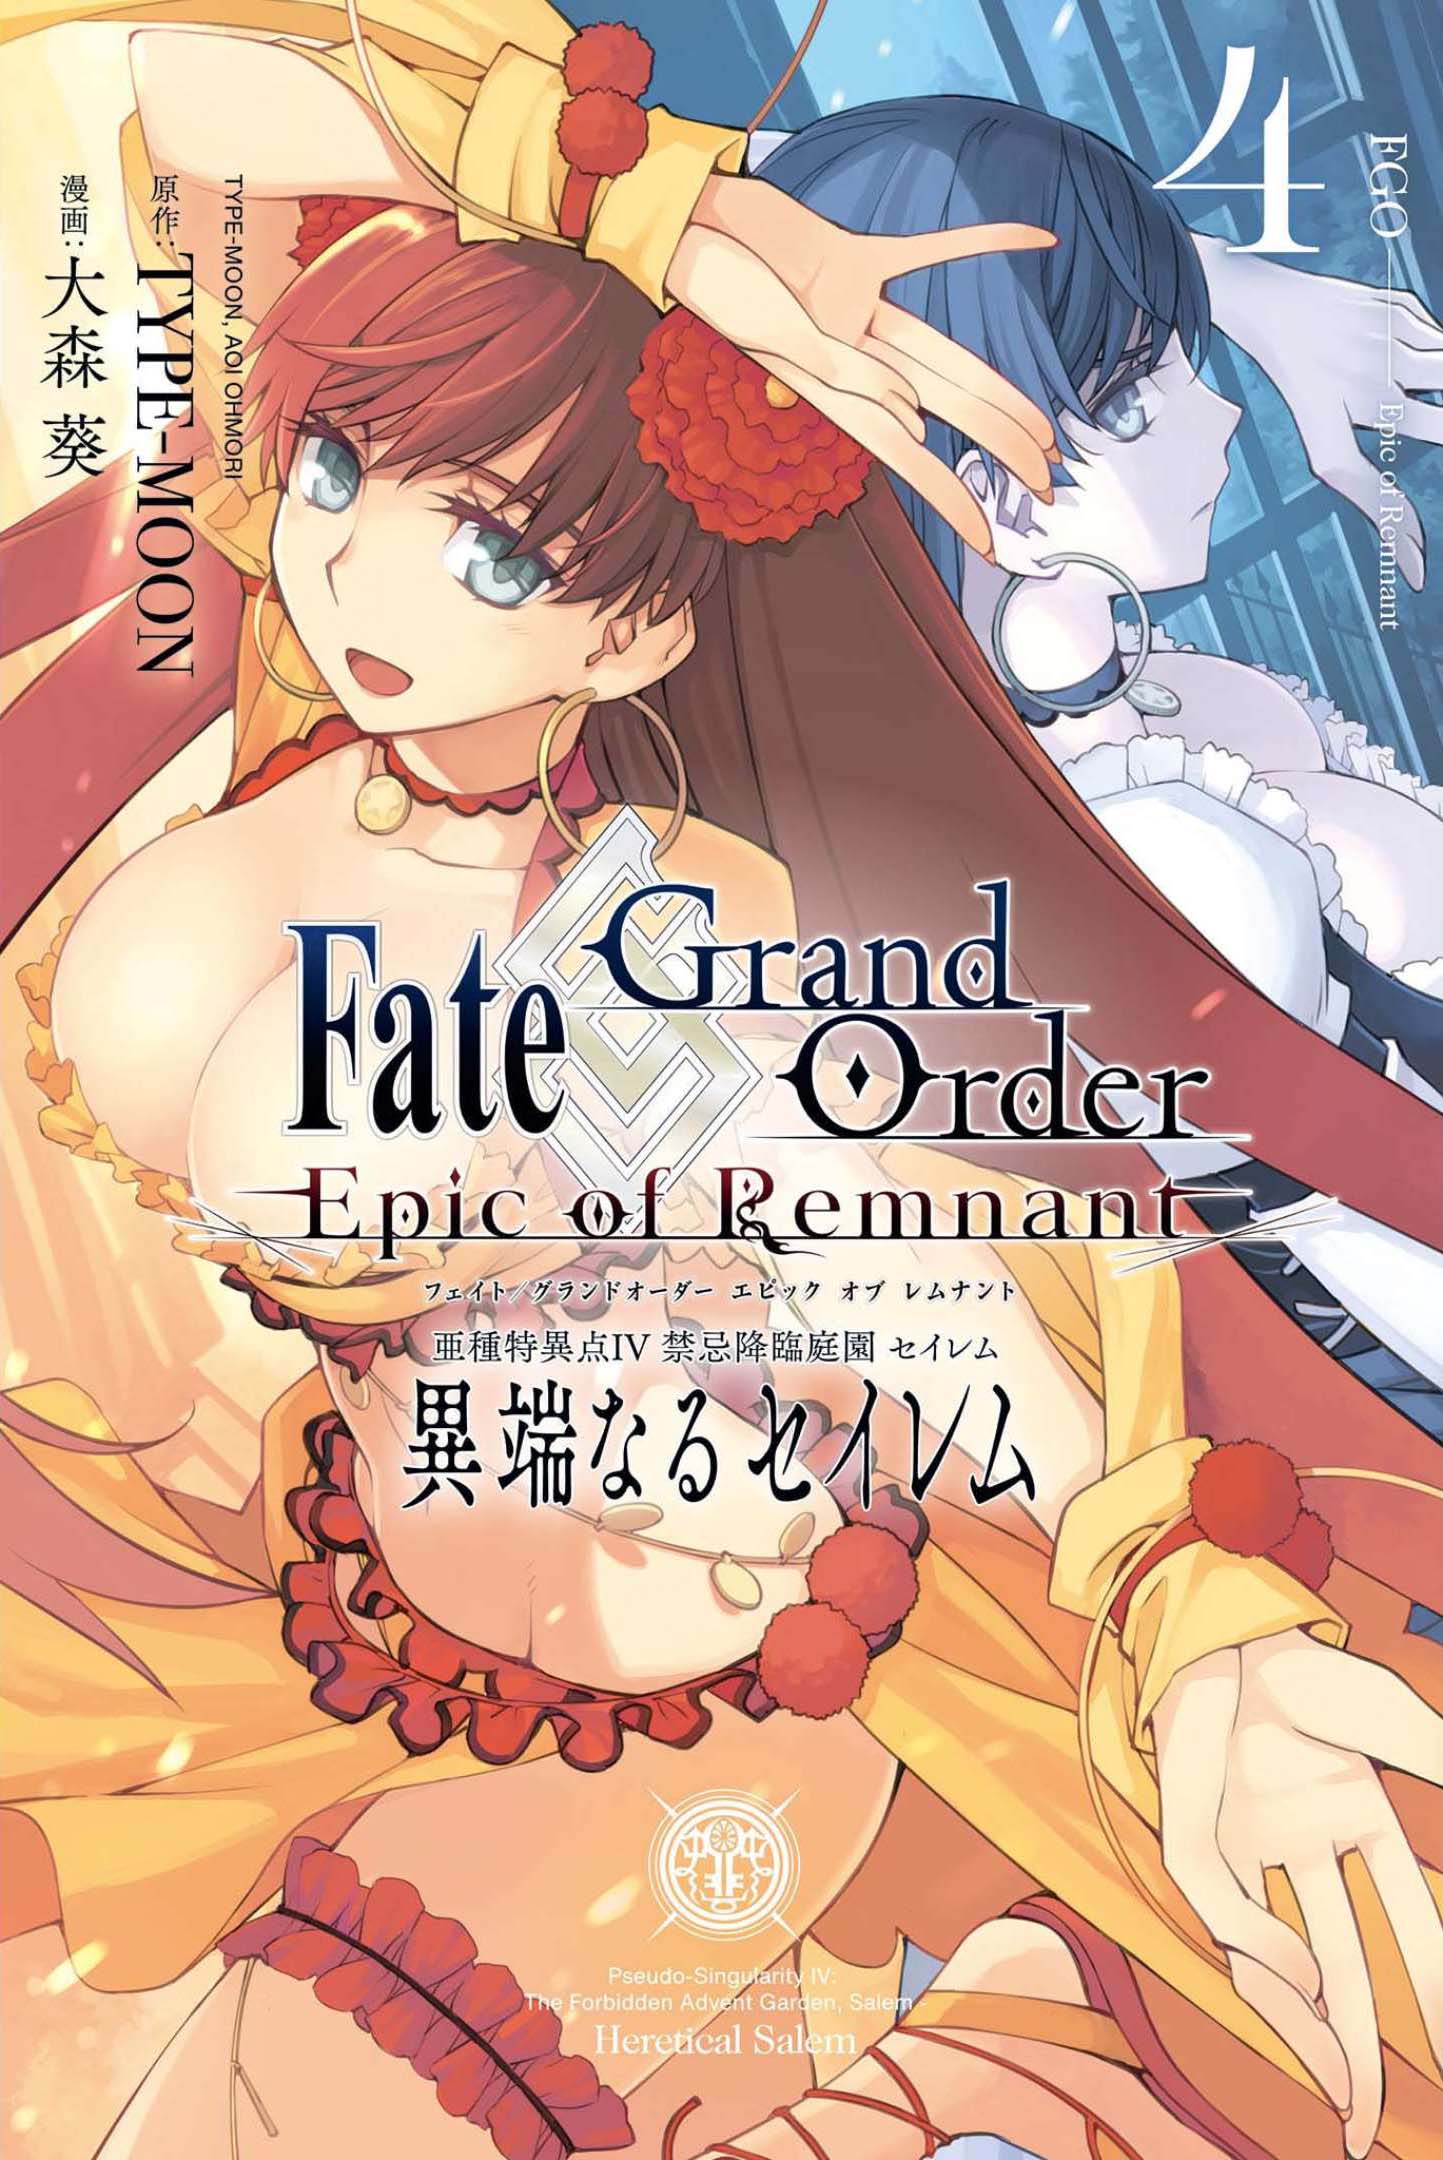 Fate/grand Order: Epic Of Remnant: Pseudo-Singularity Iv: The Forbidden Advent Garden, Salem - Heretical Salem Vol.4 Chapter 23: The Second Knot - 4 - Picture 1